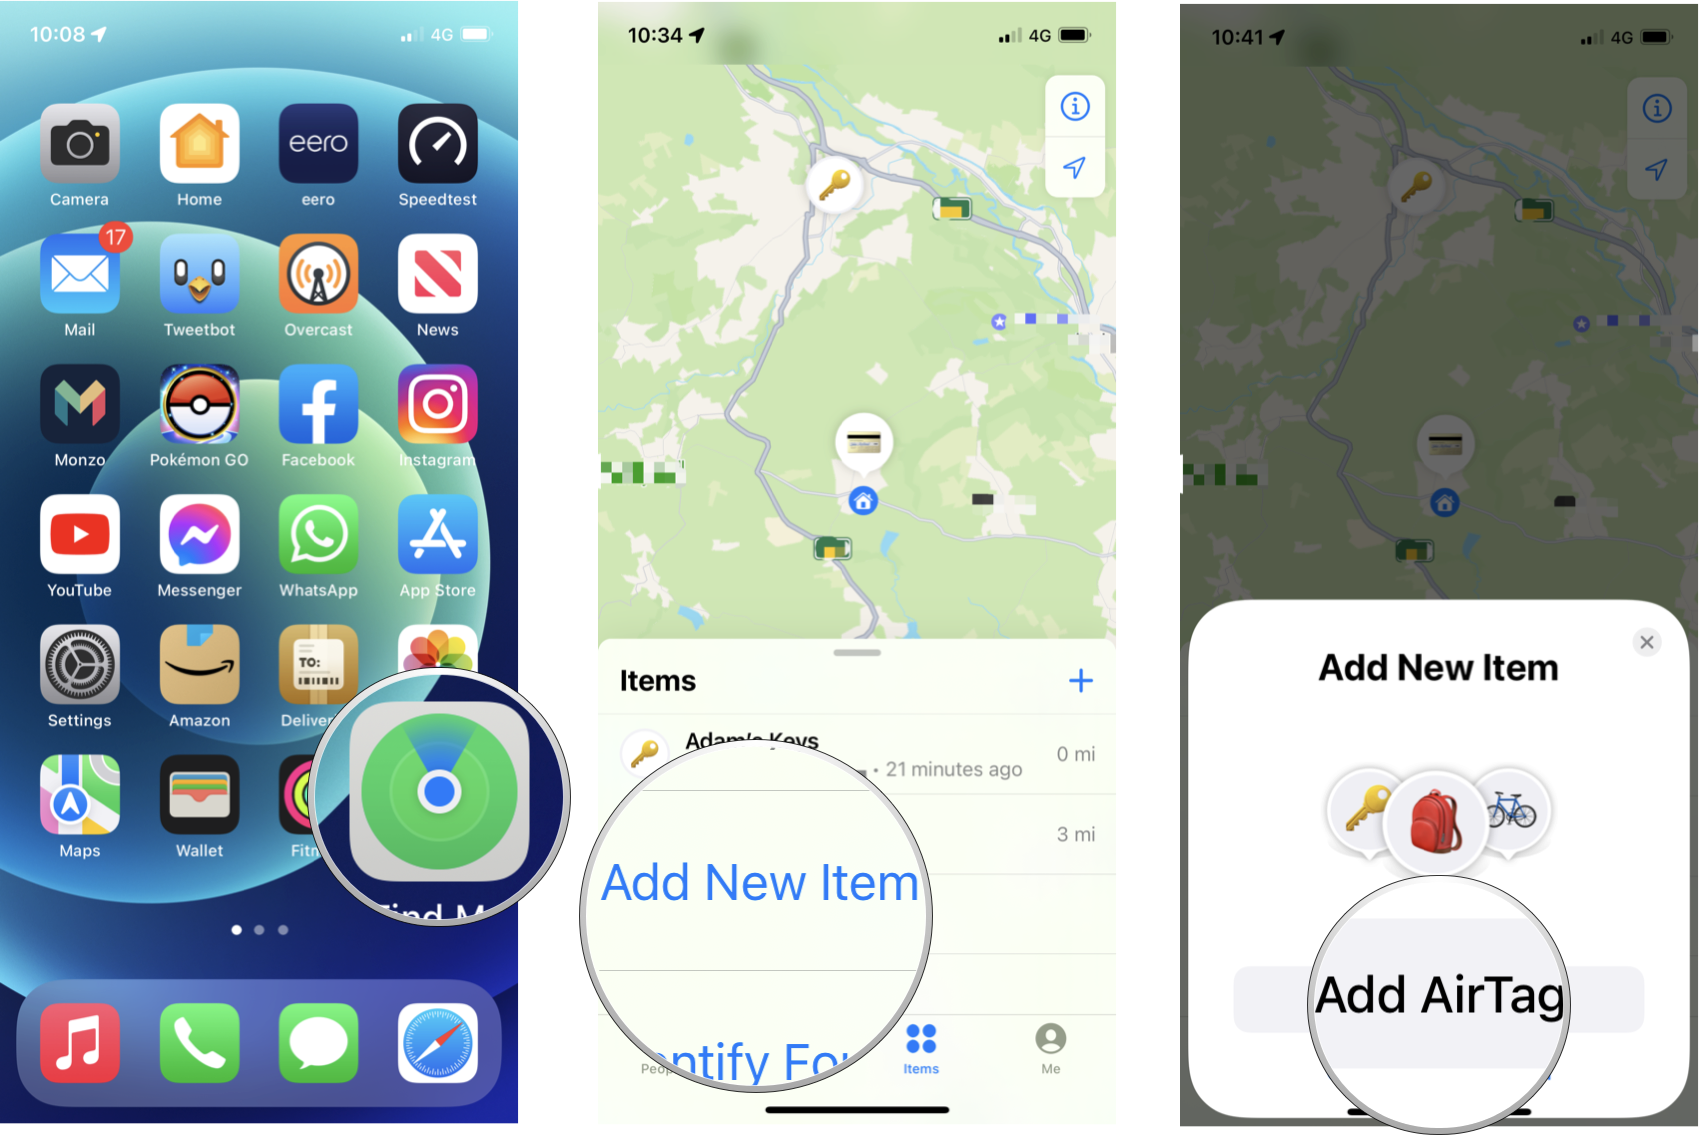 Track a personal item with AirTag: Open Find My, tap Items, tap Add New Item, tap Add AirTag